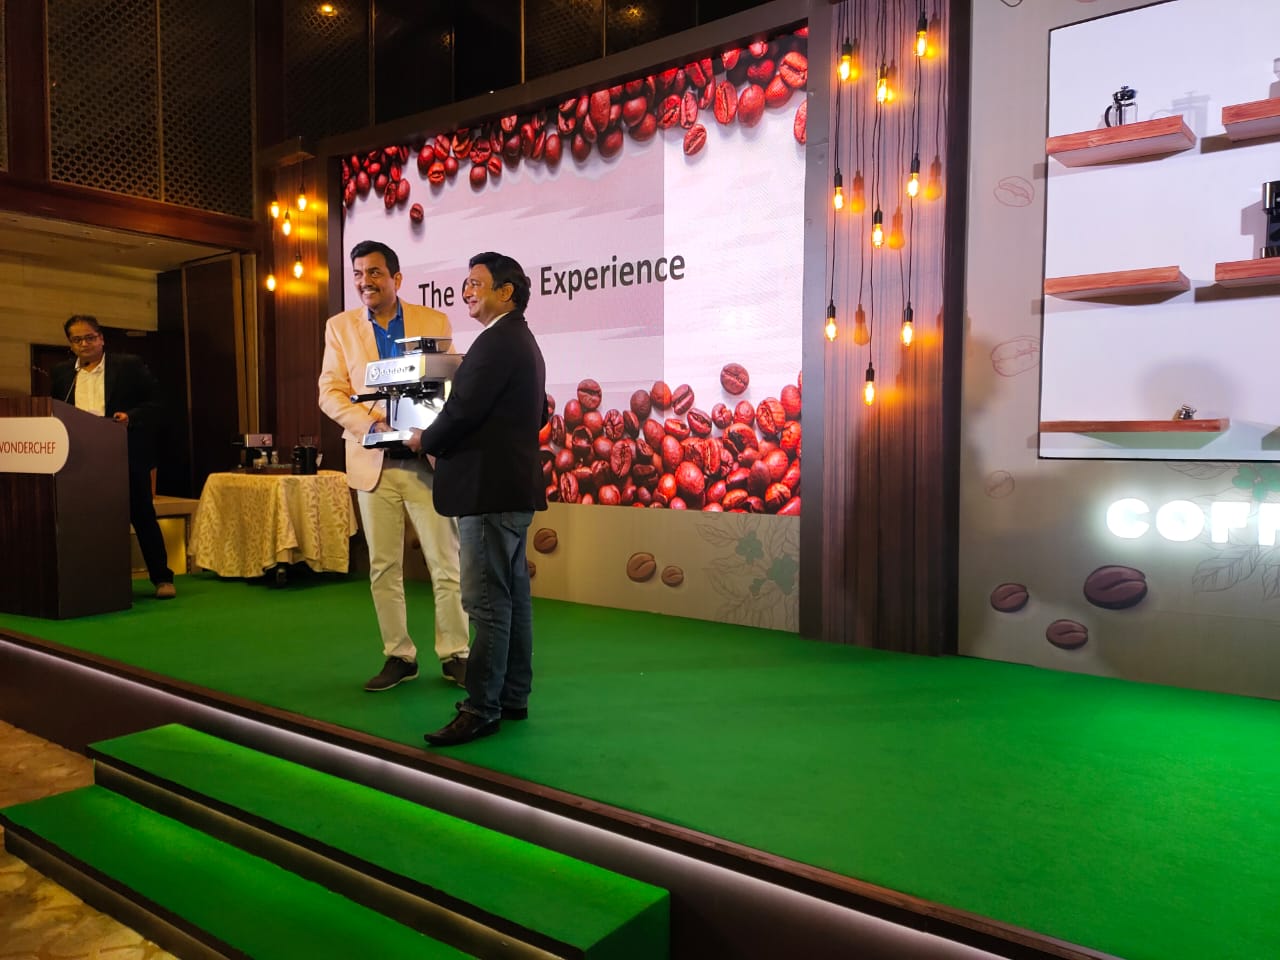 L-R: Mr. Amit Tilekar, CMO of Wonderchef ; Chef Sanjeev Kapoor, founder and the face of Wonderchef and Mr. Ravi Saxena, founder and CEO of Wonderchef during Launch of complete range of 9 coffee machines and WondeRent by Wonderchef at Hotel Four Seasons, Mumbai (10.08.22)